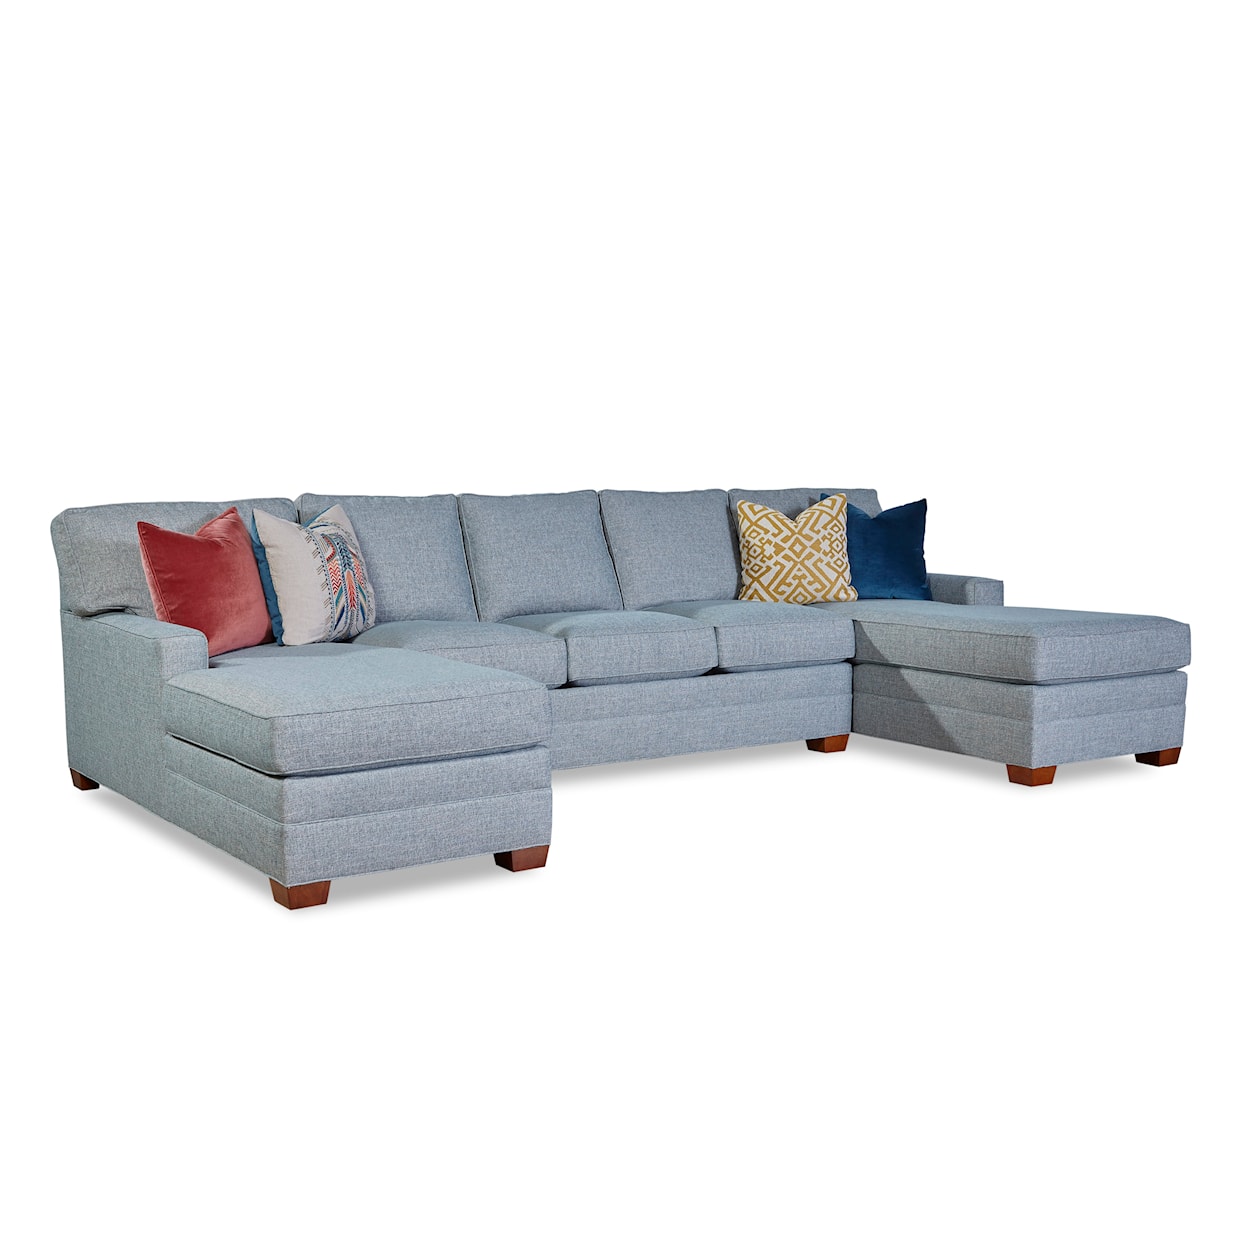 Huntington House 2062 Collection 5-Seat Sectional Sofa with Chaises